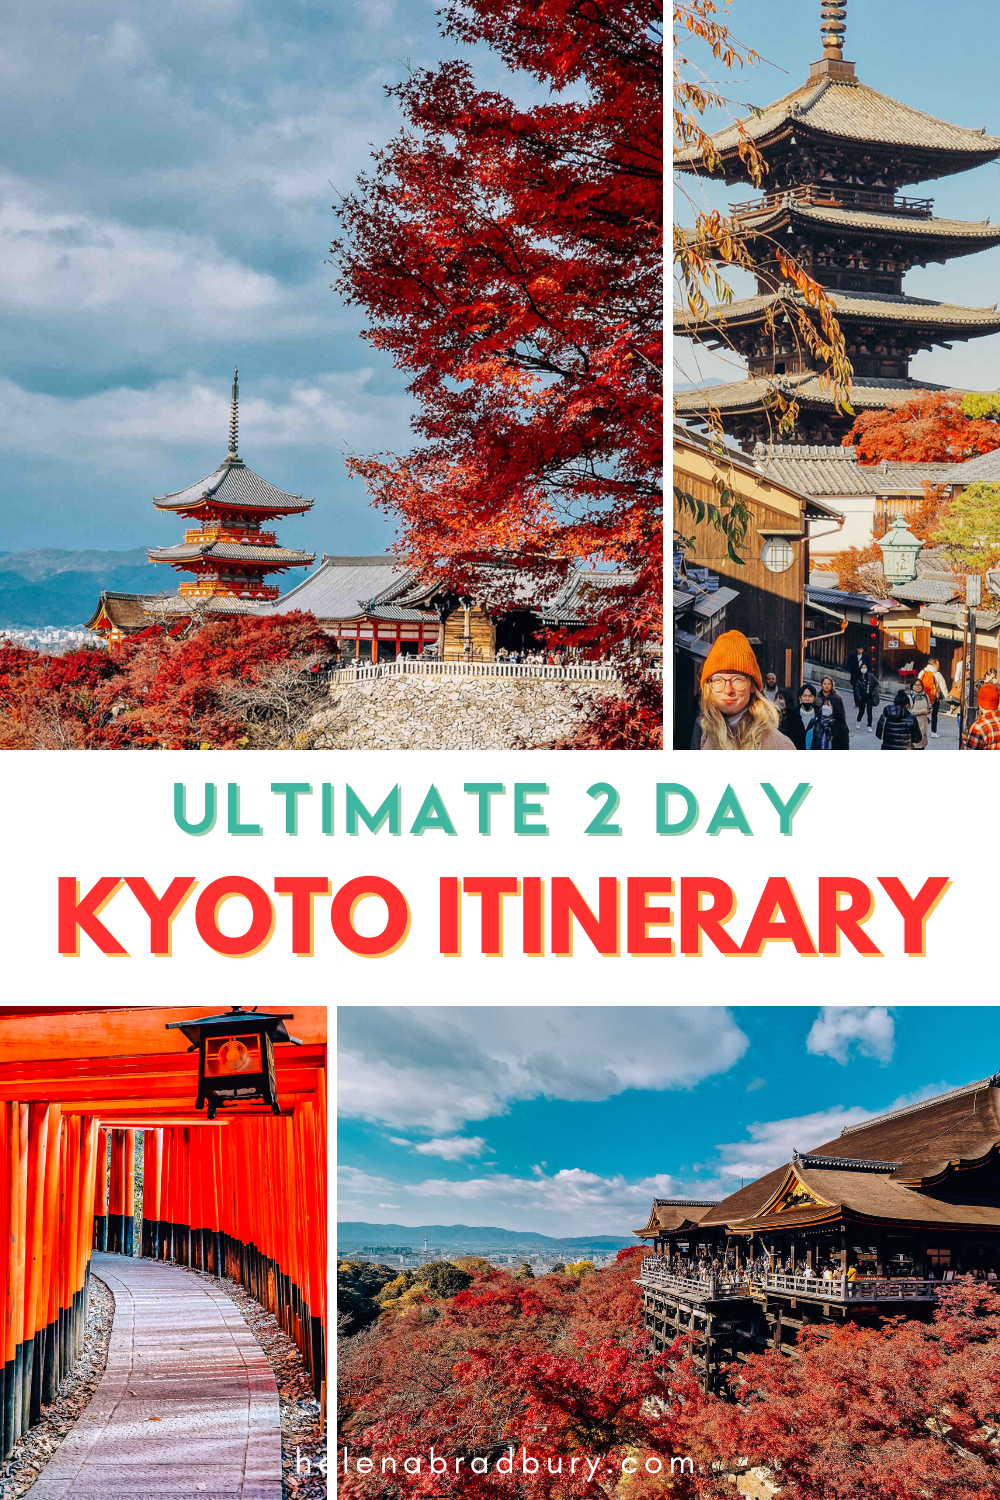 This 2 day Kyoto itinerary helps you maximise your time in Kyoto, visit all the must see spots in Kyoto and includes hotel and food recommendations to make the most of your trip! | 2 day itinerary kyoto | two day itinerary kyoto | kyoto two days itin